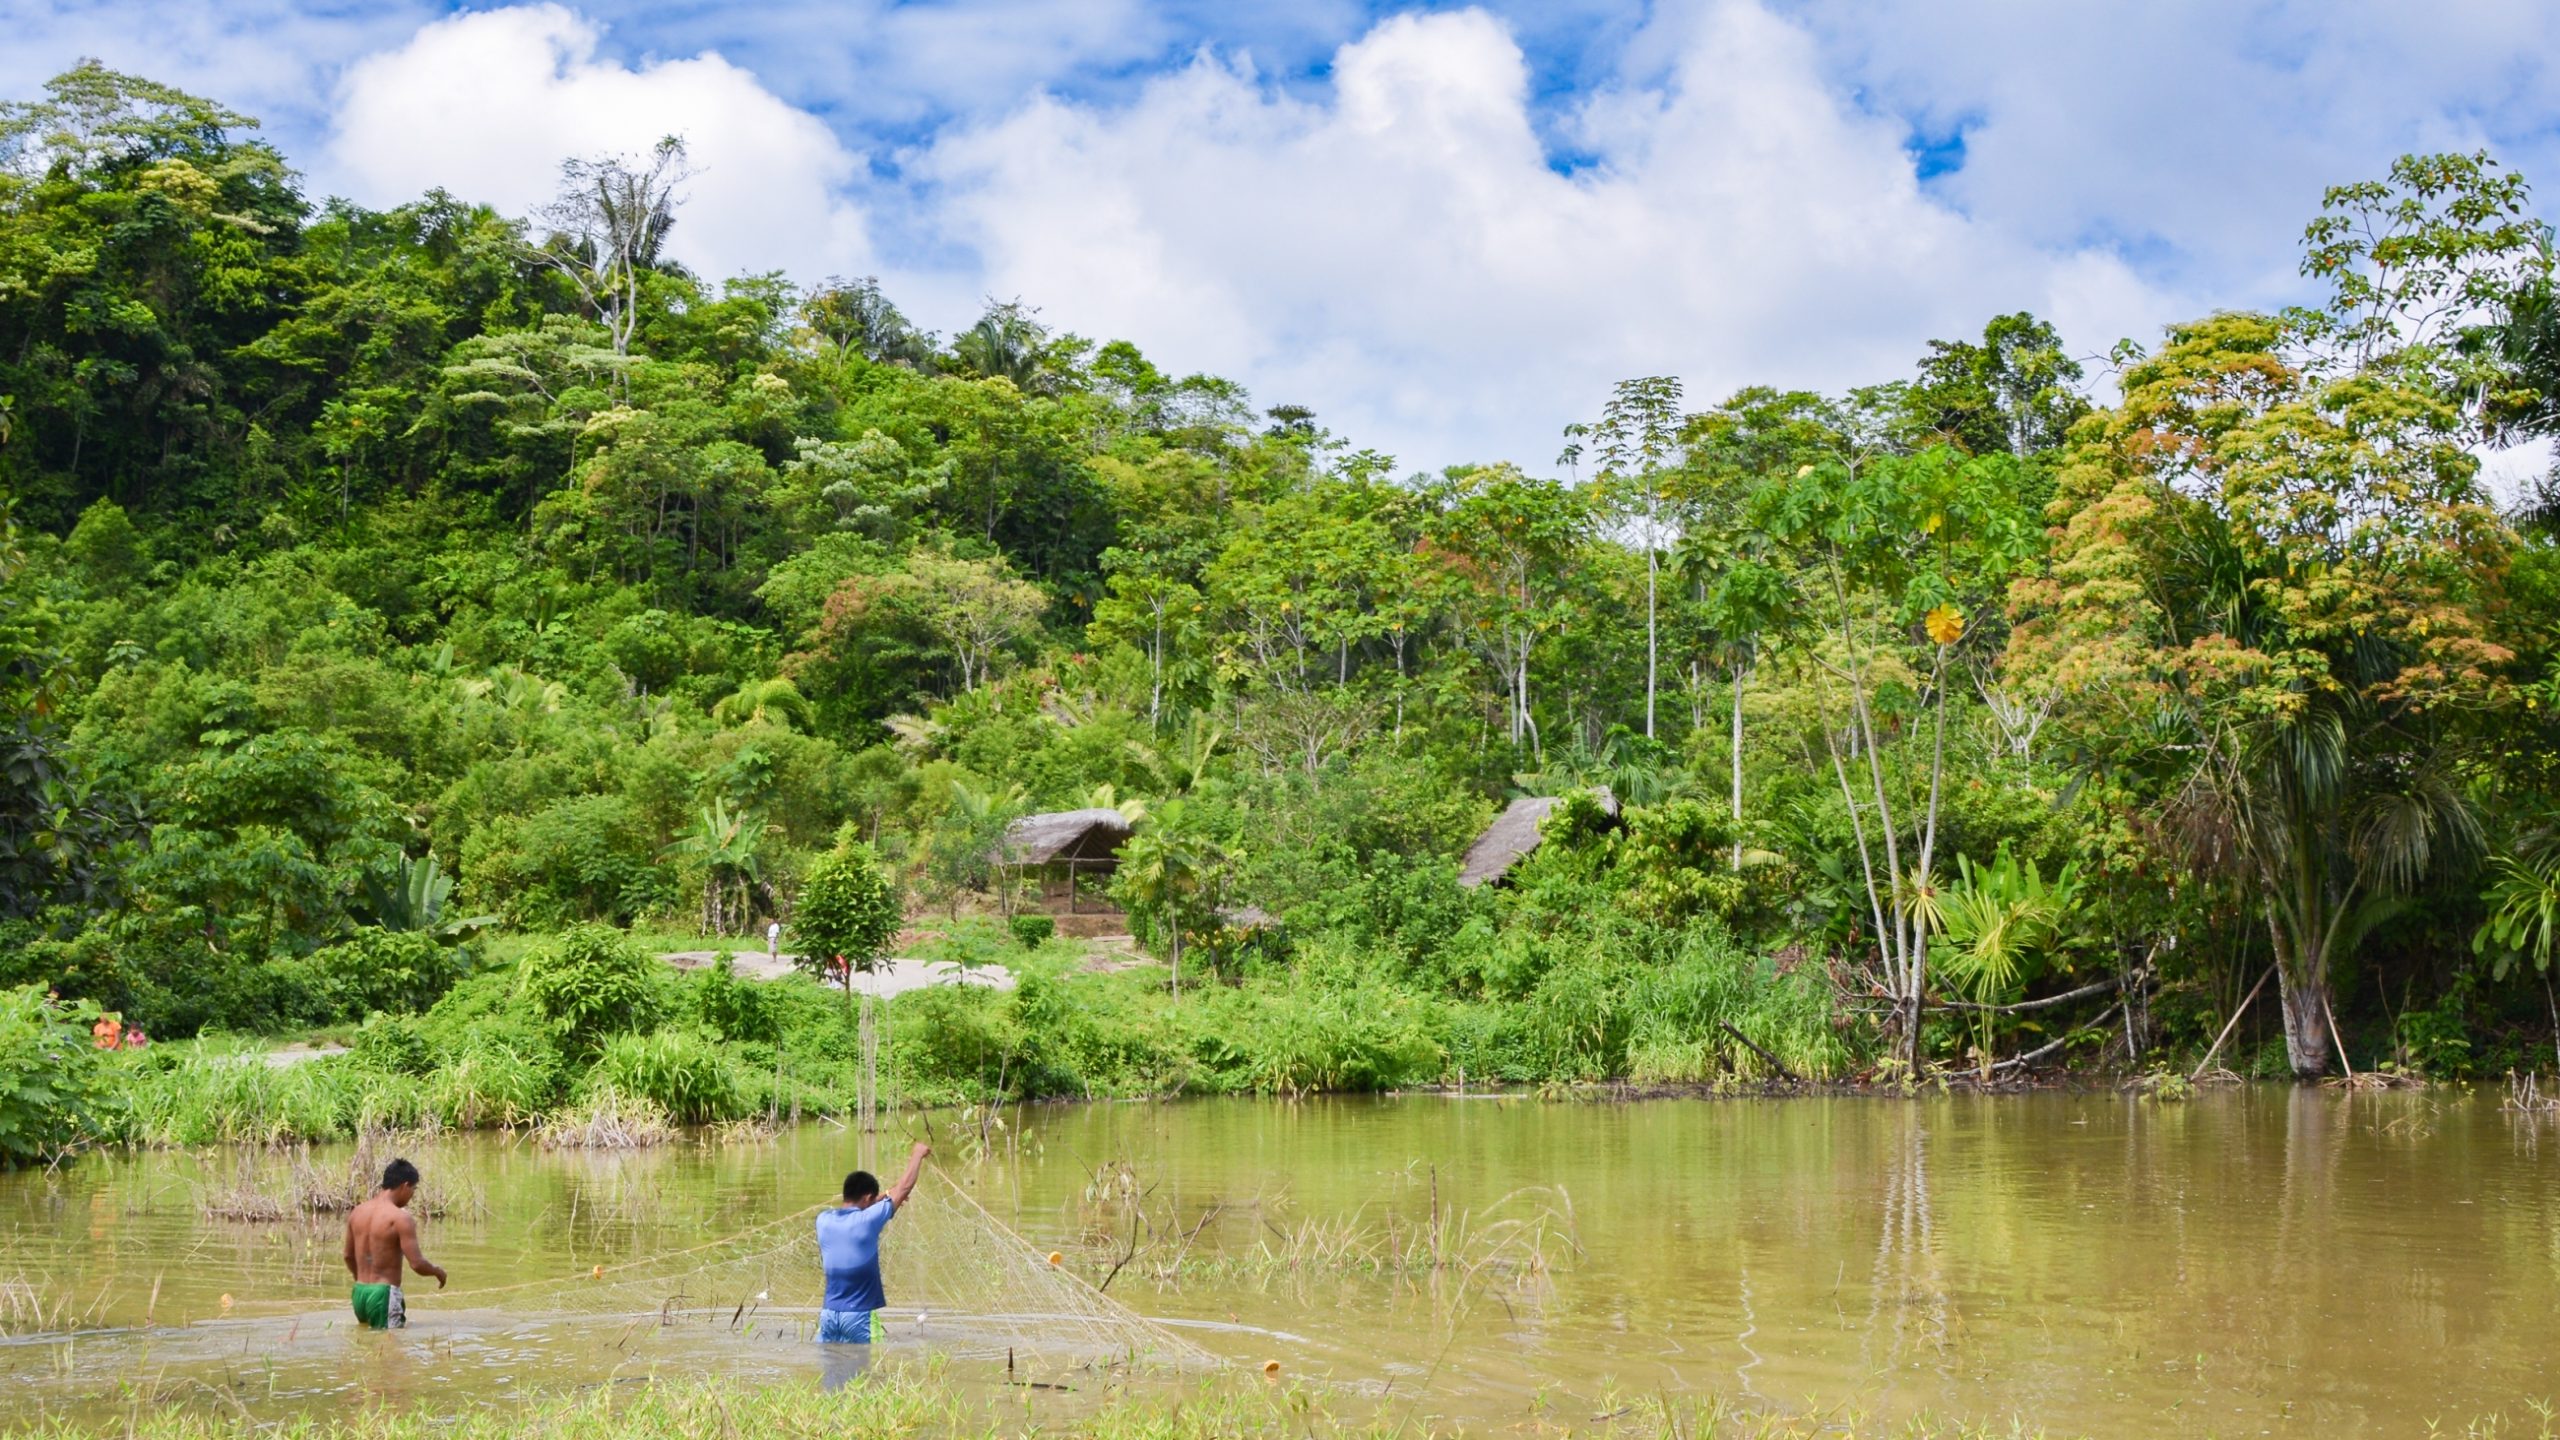 Two people practice the sustainable income method of fish farming, they check a fishing net for catch in a large pond surrounded by vibrant tropical rainforest. 